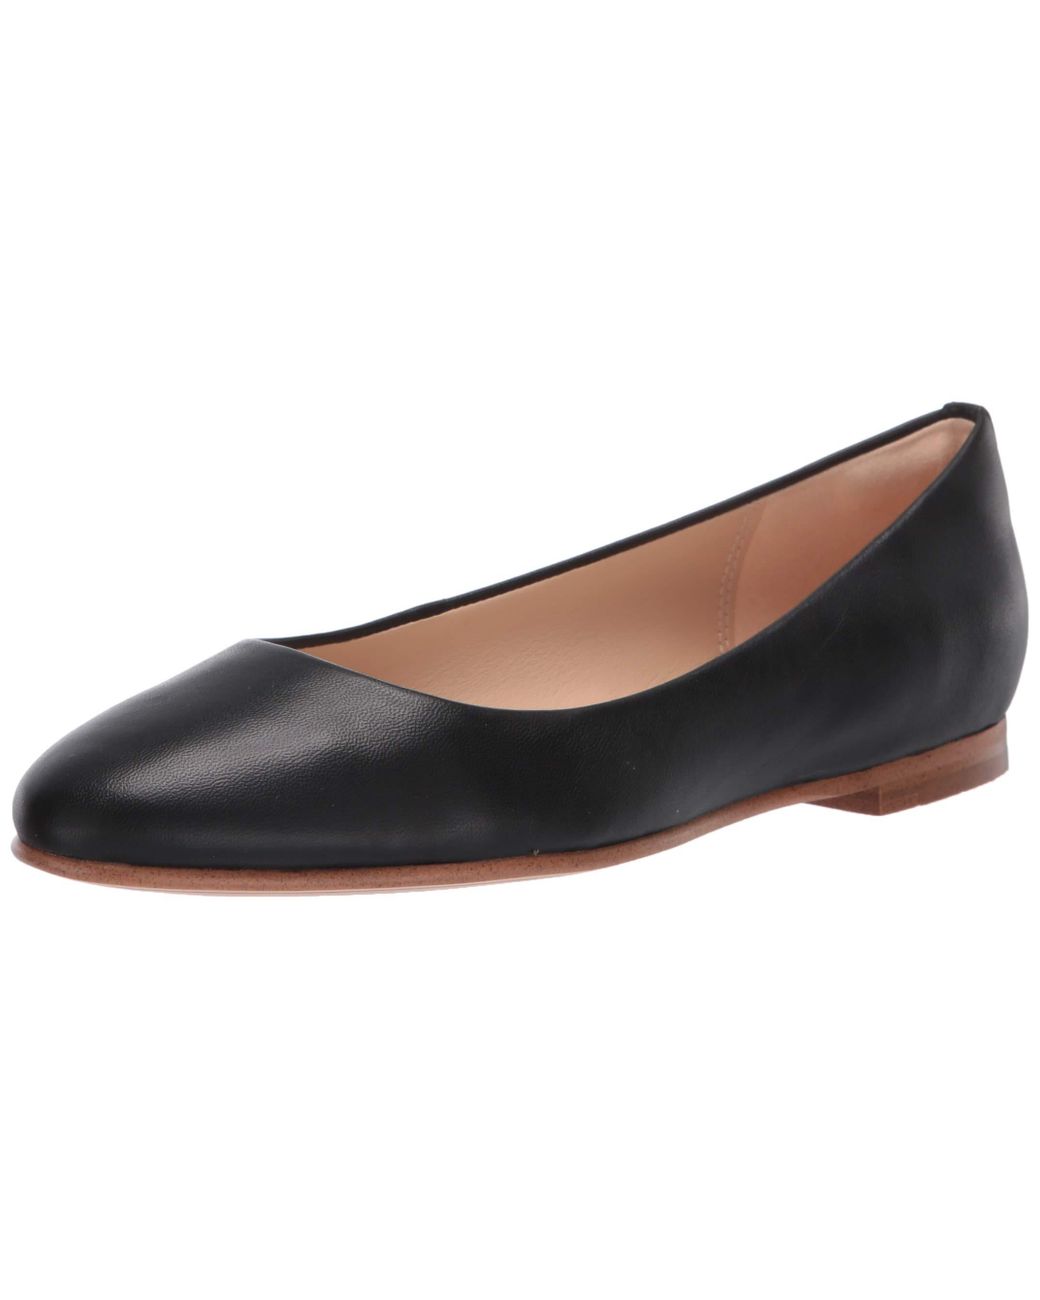 Clarks Leather S Grace Piper Ballet Flat in Black Leather (Black ...